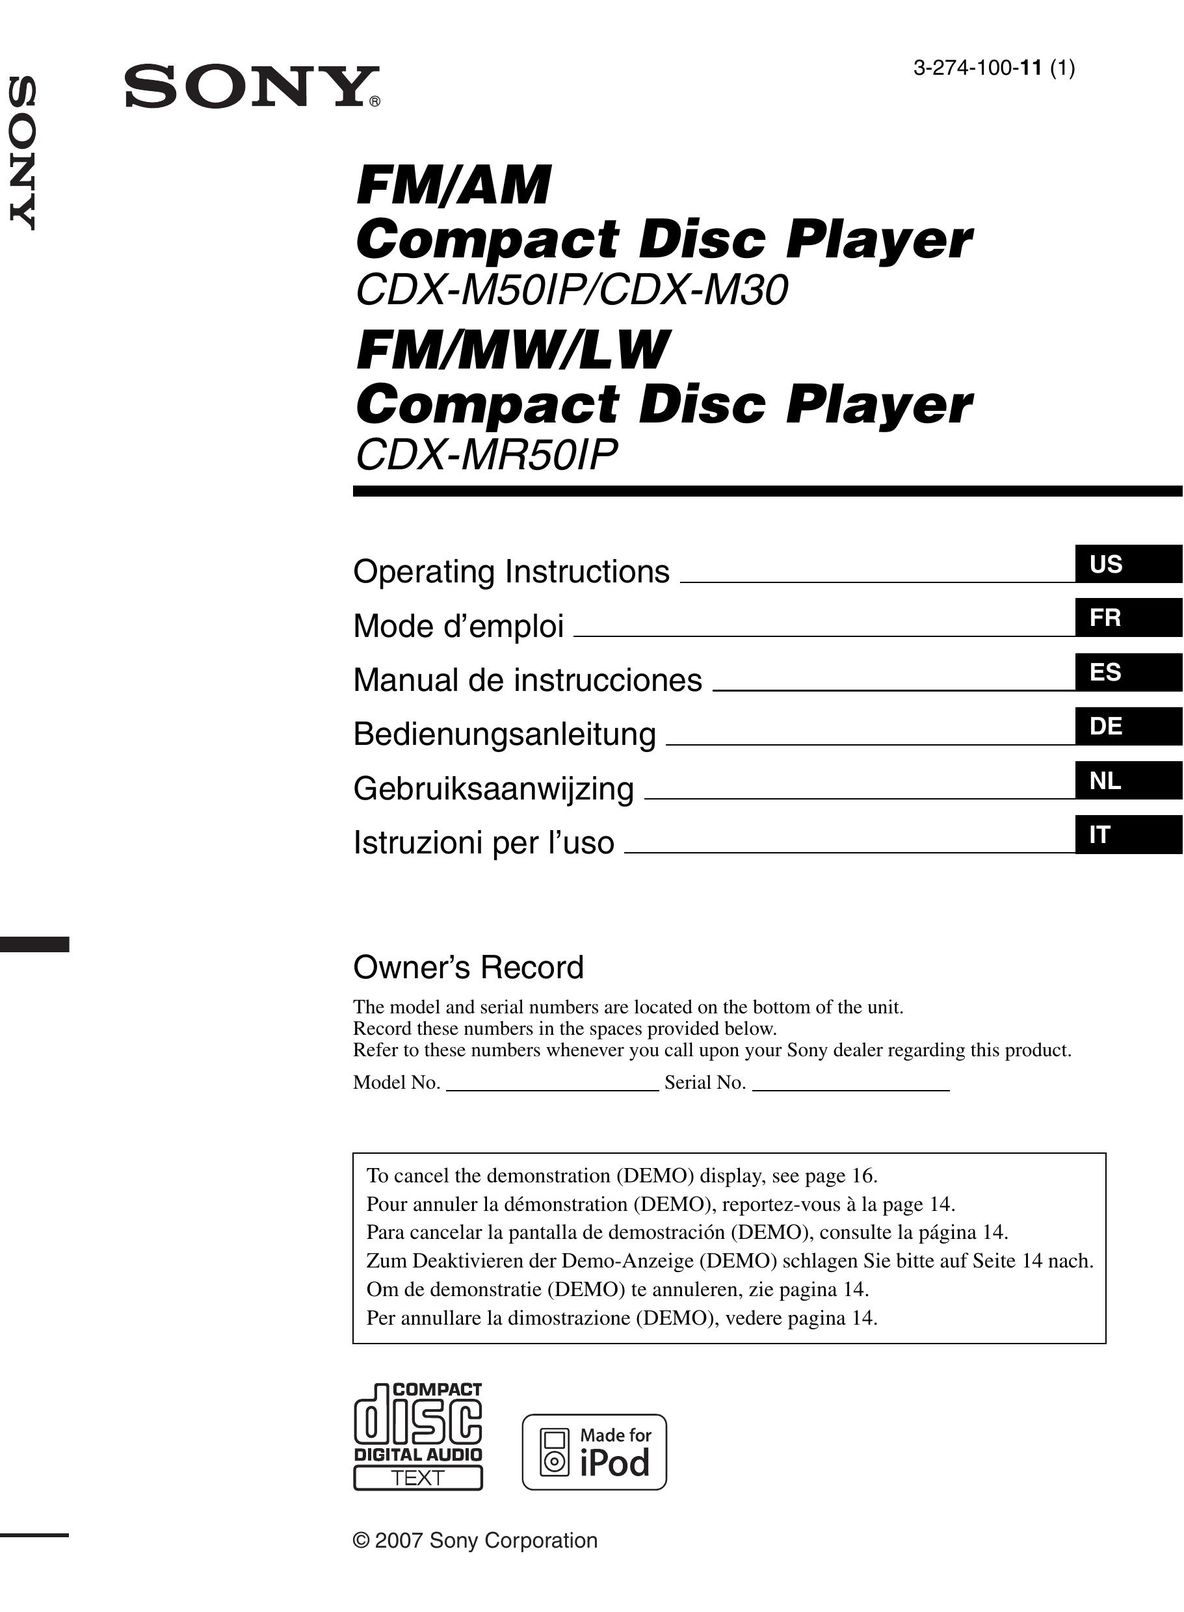 Sony CDX-M50IP Portable CD Player User Manual